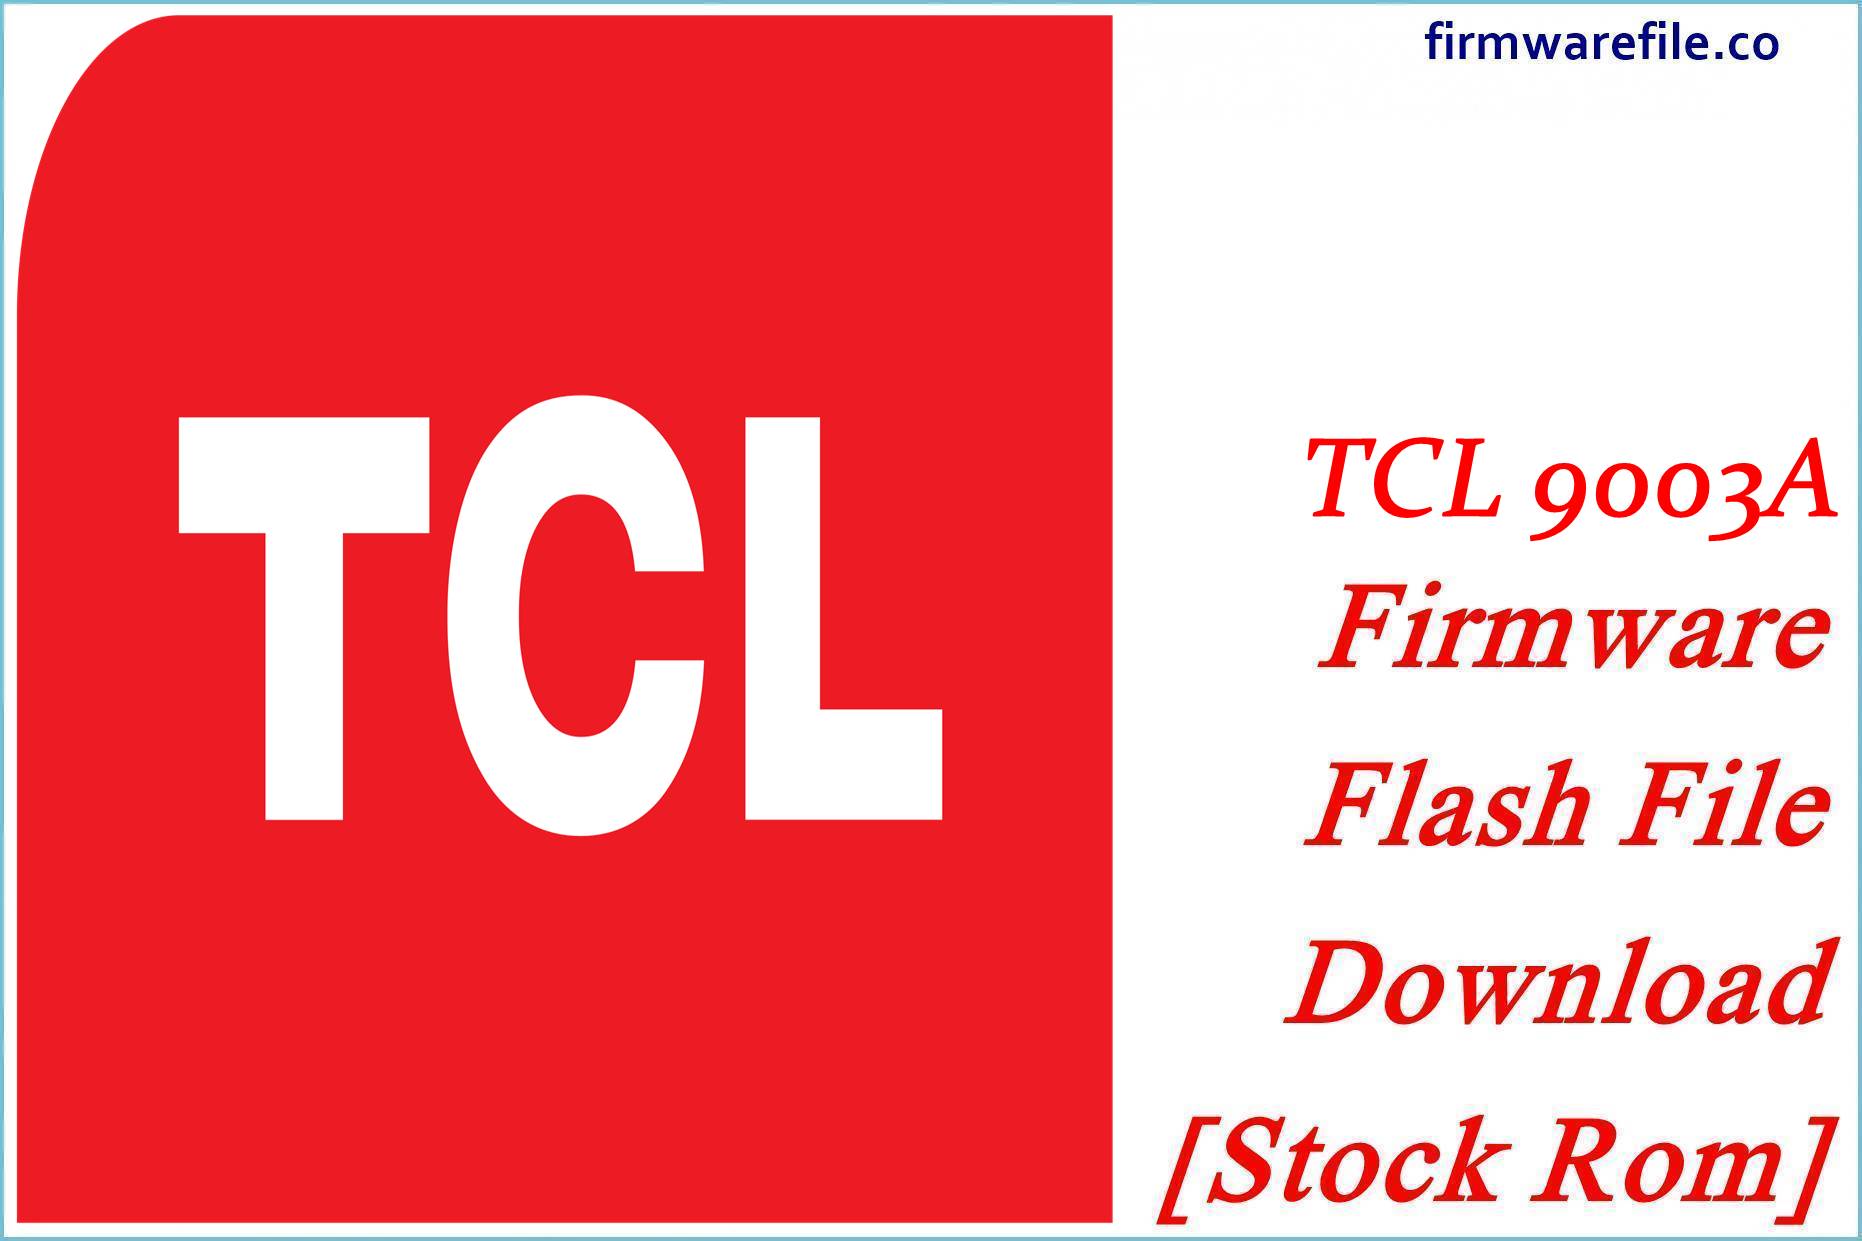 TCL 9003A